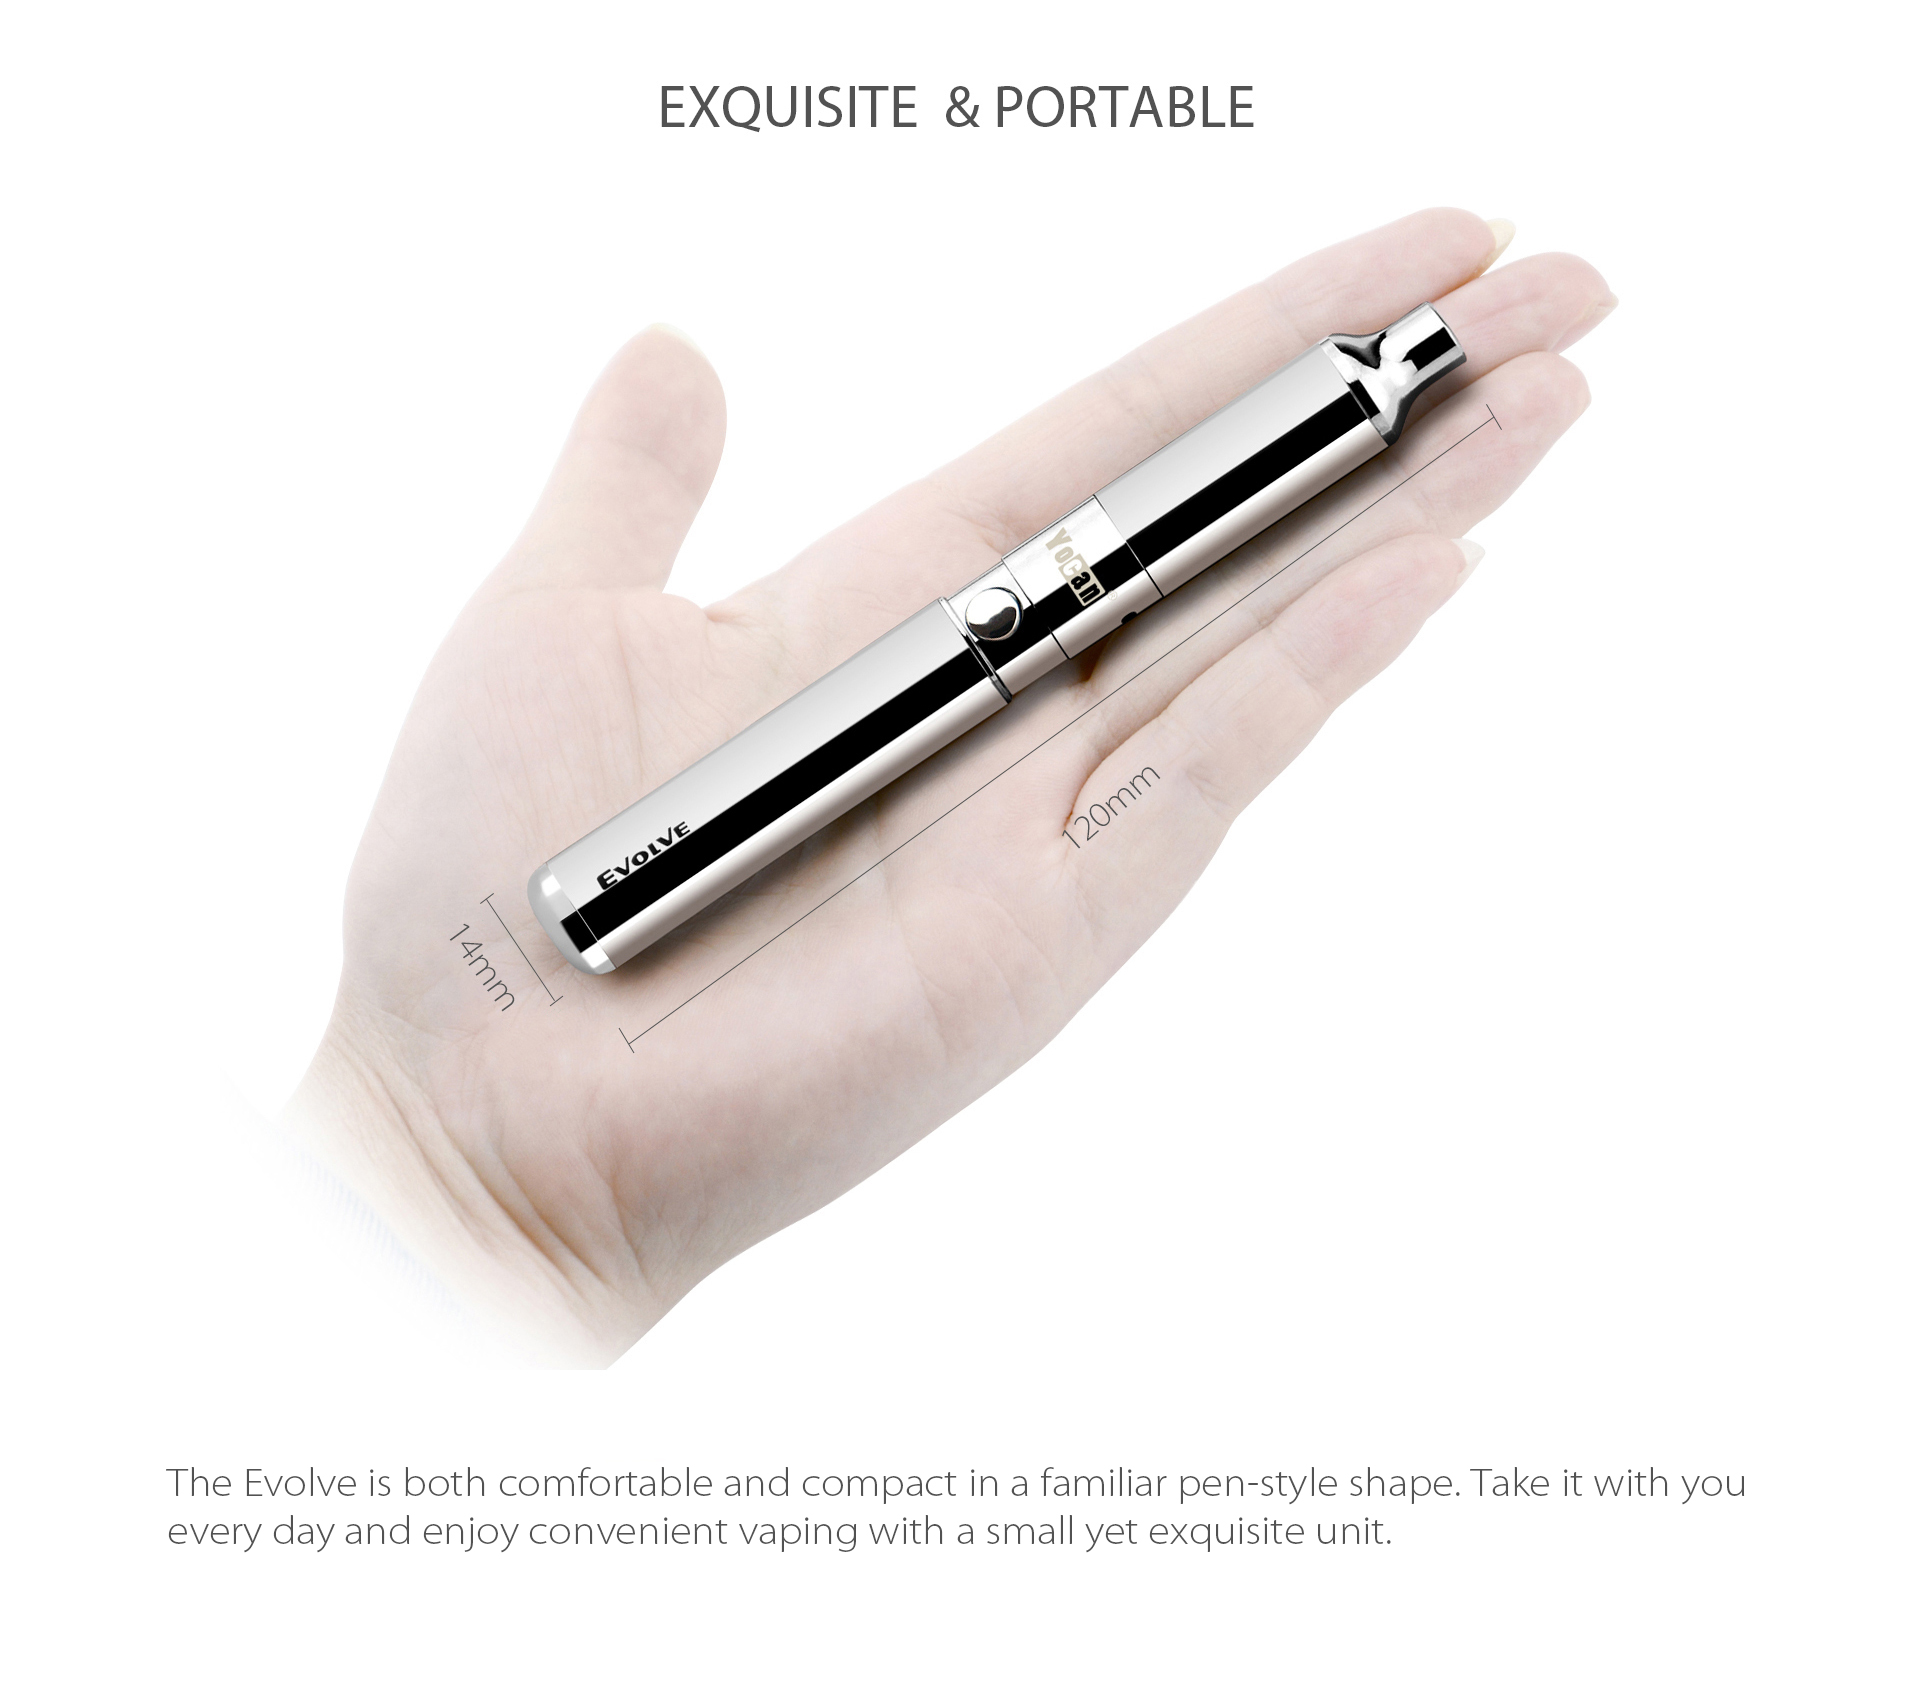 Yocan Evolve Vaporizer 2020 Version is both comfortable and compact in a familiar pen-style shape.